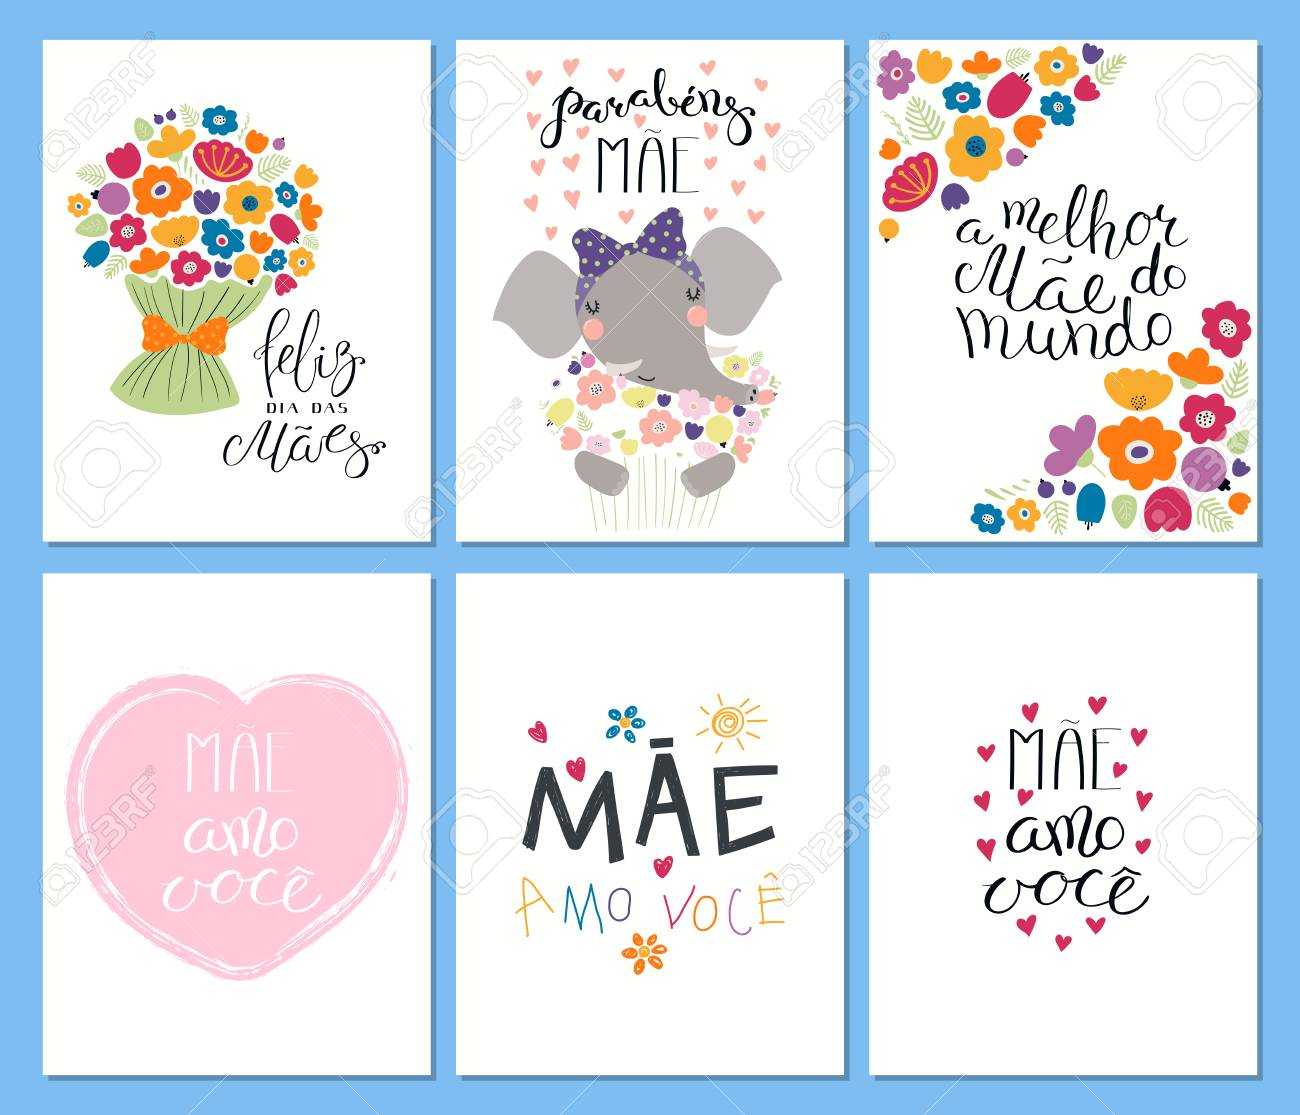 Set Of Mother's Day Cards Templates With Quotes In Portuguese For Mothers Day Card Templates